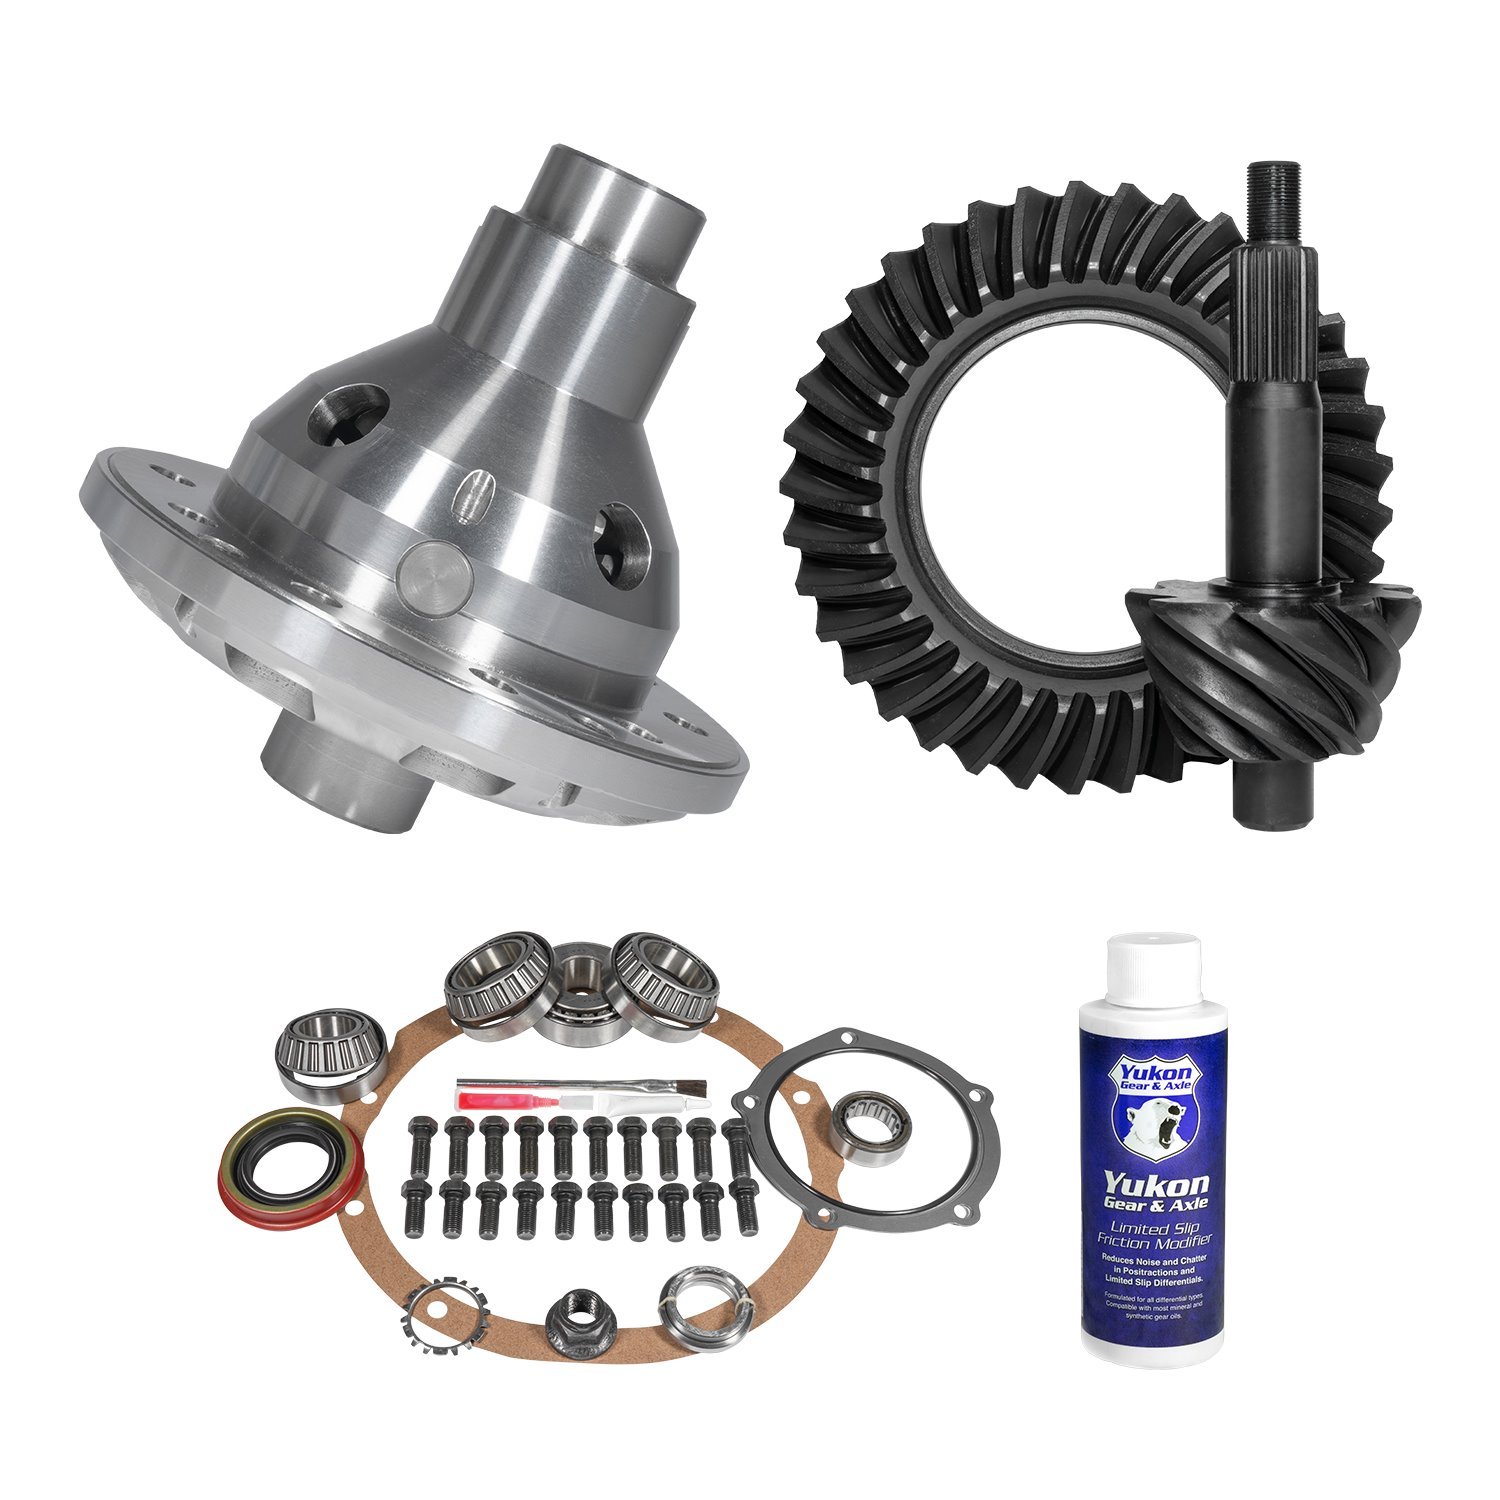 Muscle Car Limited Slip & Re-Gear Kit For Ford 9 in., 28 Spline, 3.70 Ratio